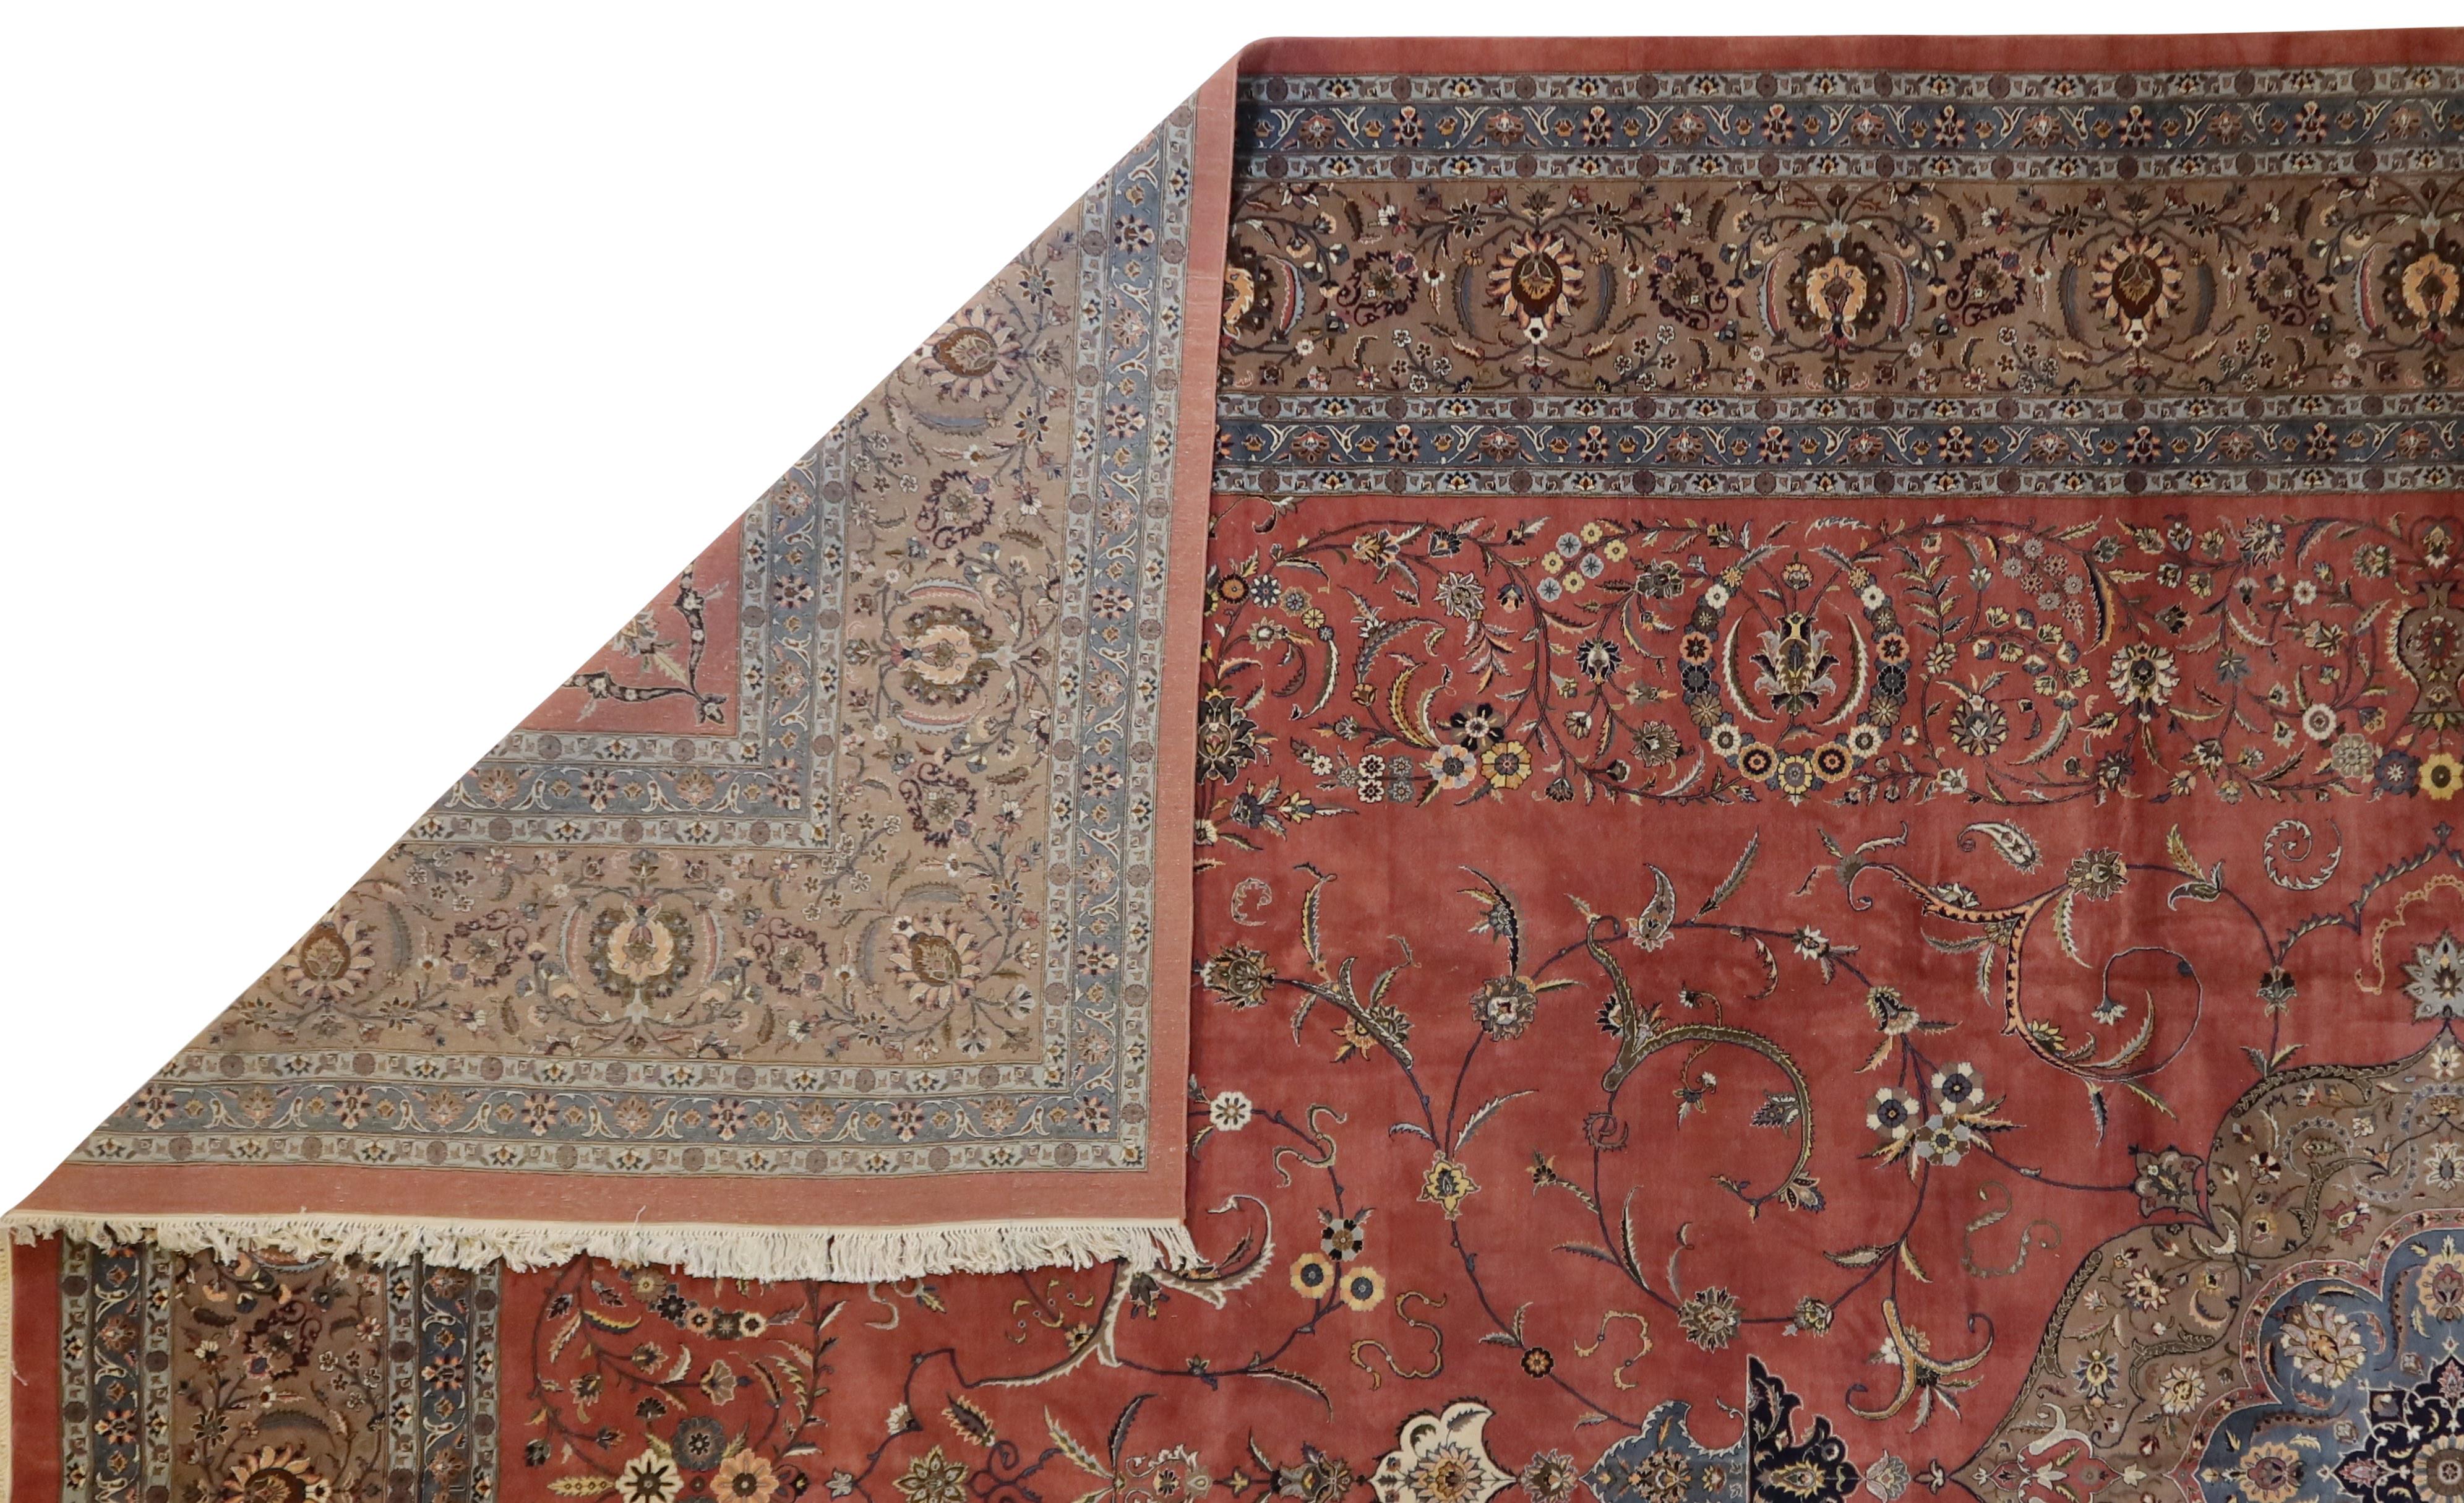 This fine quality, new production Esfahan rug is a reproduction of the historic Persian rugs. High quality New Zealand yarn is finely hand-knotted to create these luxury rugs that are unusually high performance. The rugs are offered in standard